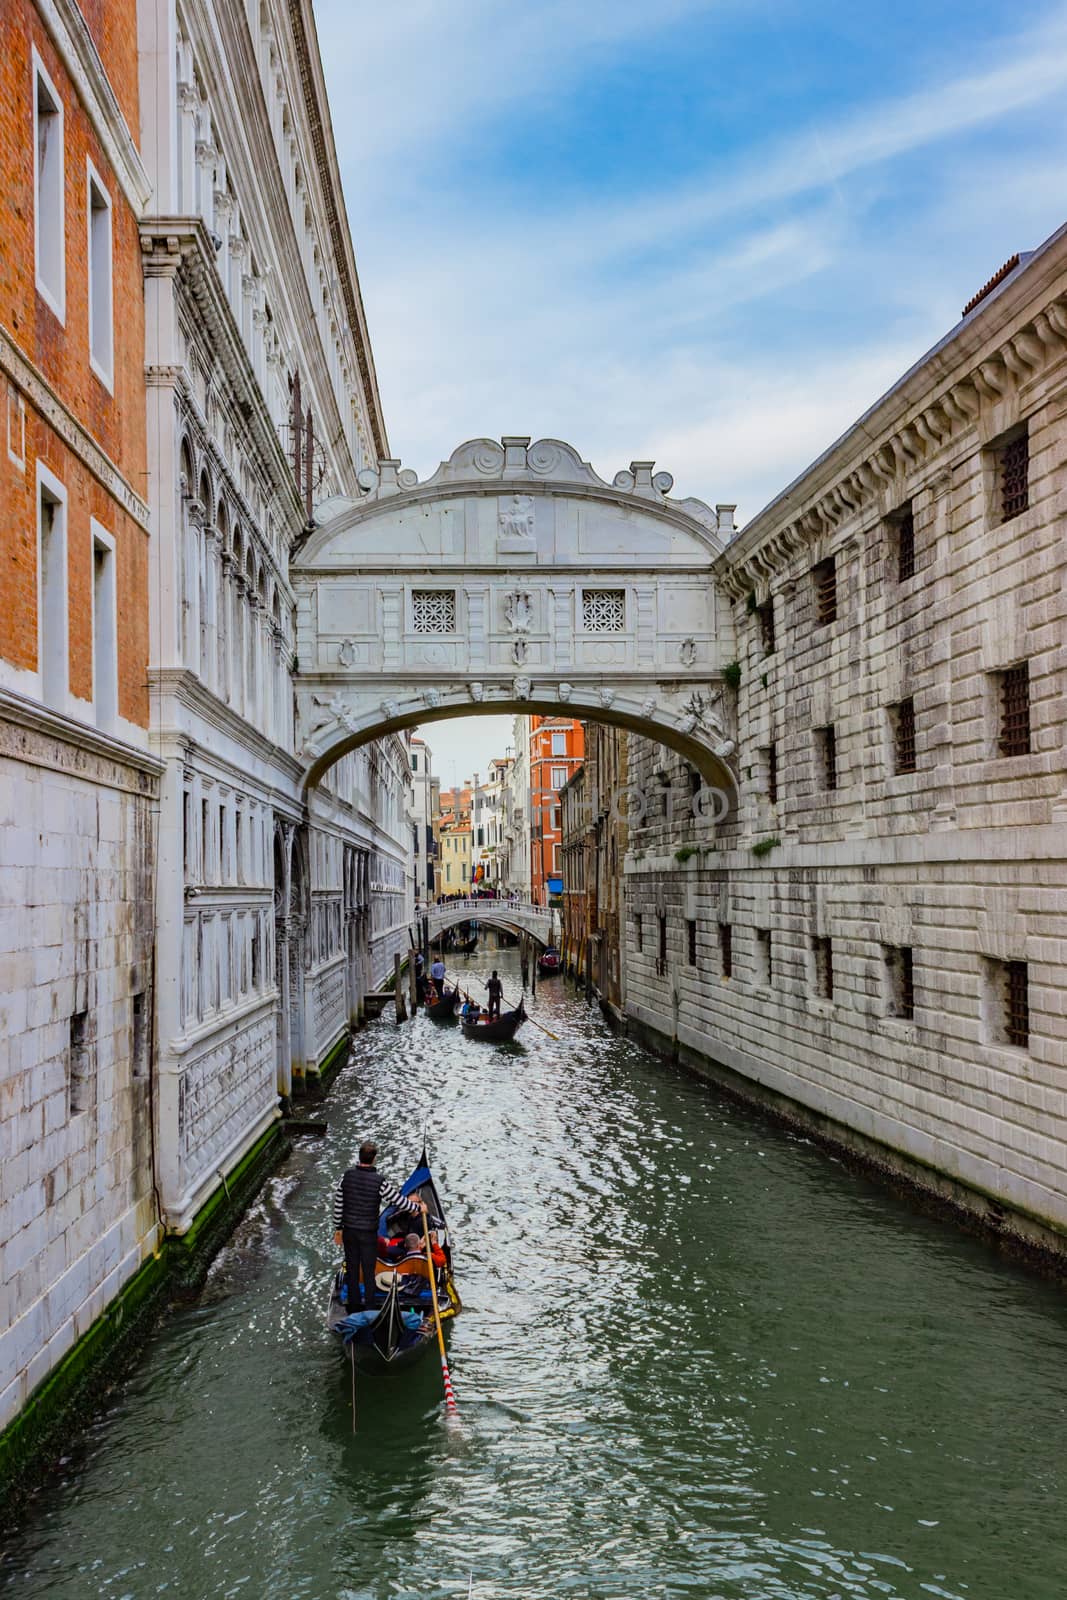 View of the famous Bridge of Sighs in Venice by Sid10